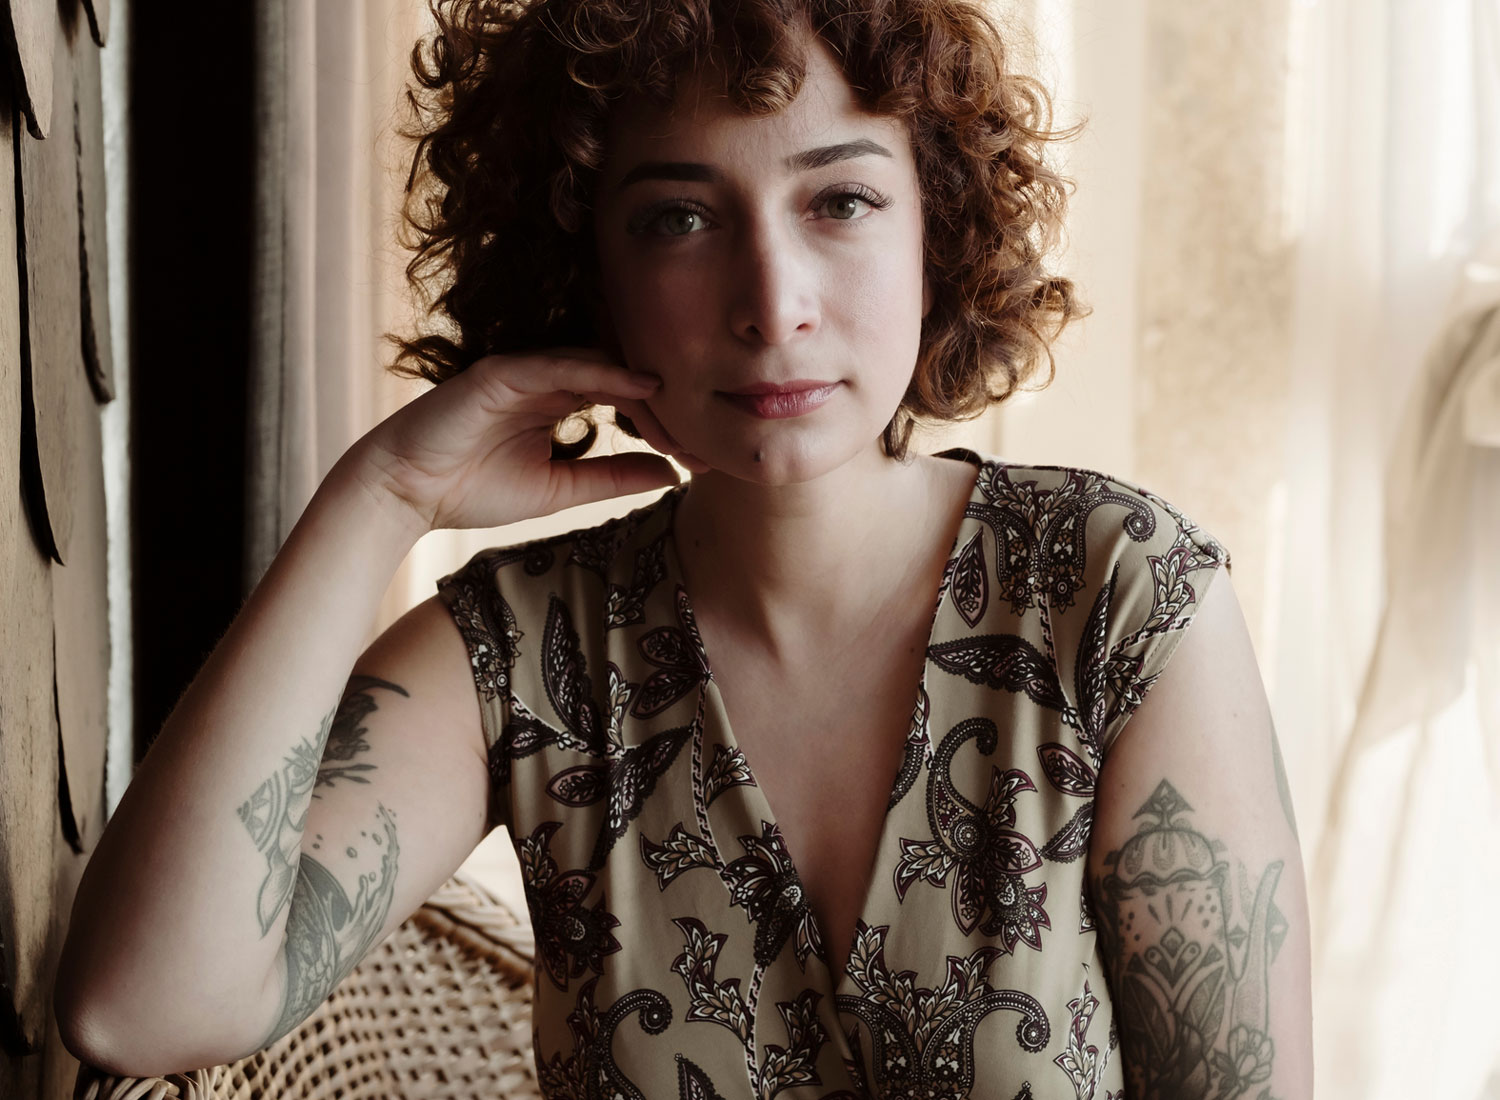 Young white woman with curly auburn hair and tattoos on her arms looks defiantly at the camera